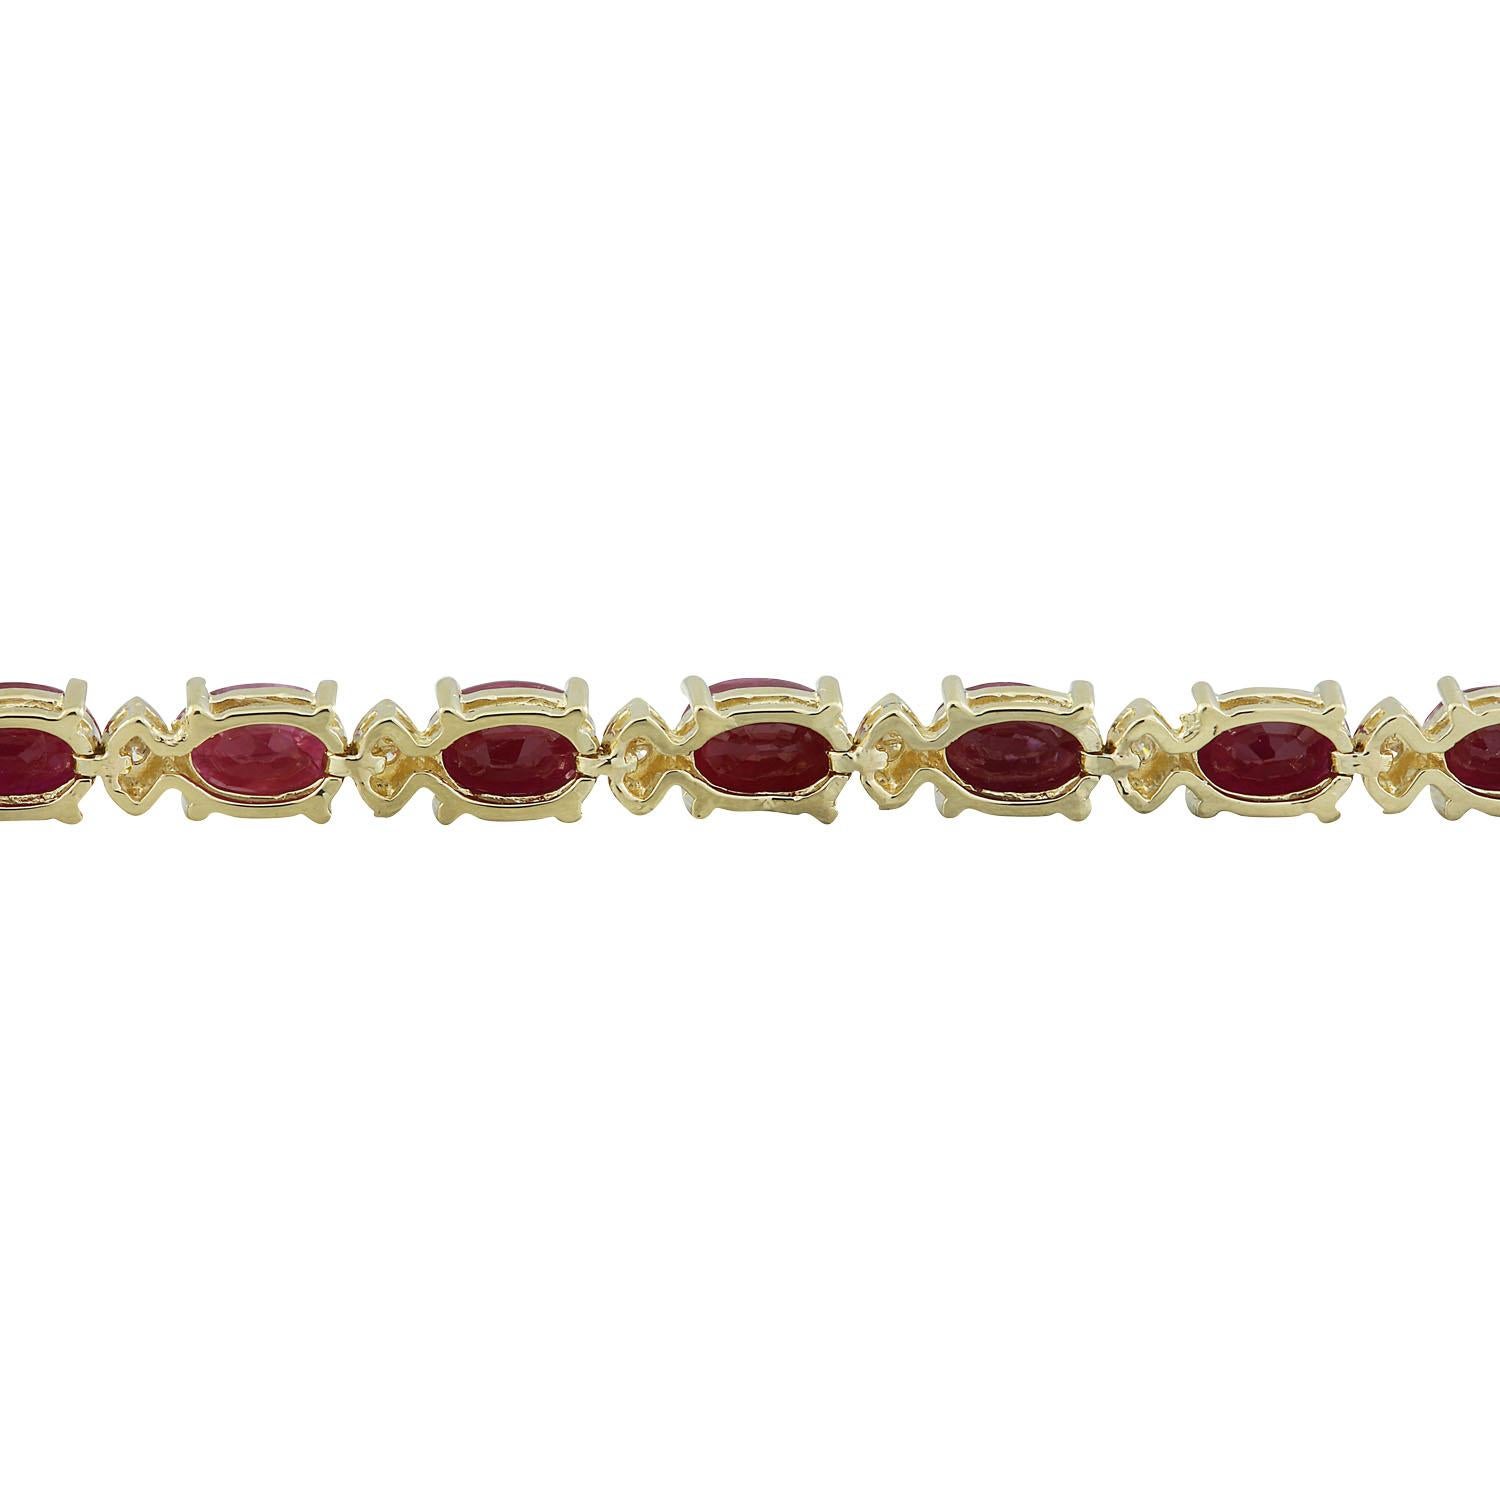 11.95 Carat Natural Ruby 14 Karat Solid Yellow Gold Diamond Bracelet
Stamped: 14K 
Total Bracelet Weight: 11.1 Grams
Bracelet Length: 7.0 Inches 
Ruby  Weight: 11.45 Carat (6.00x4.00 Millimeters) 
Diamond Weight: 0.50 Carat (F-G Color, VS2-SI1